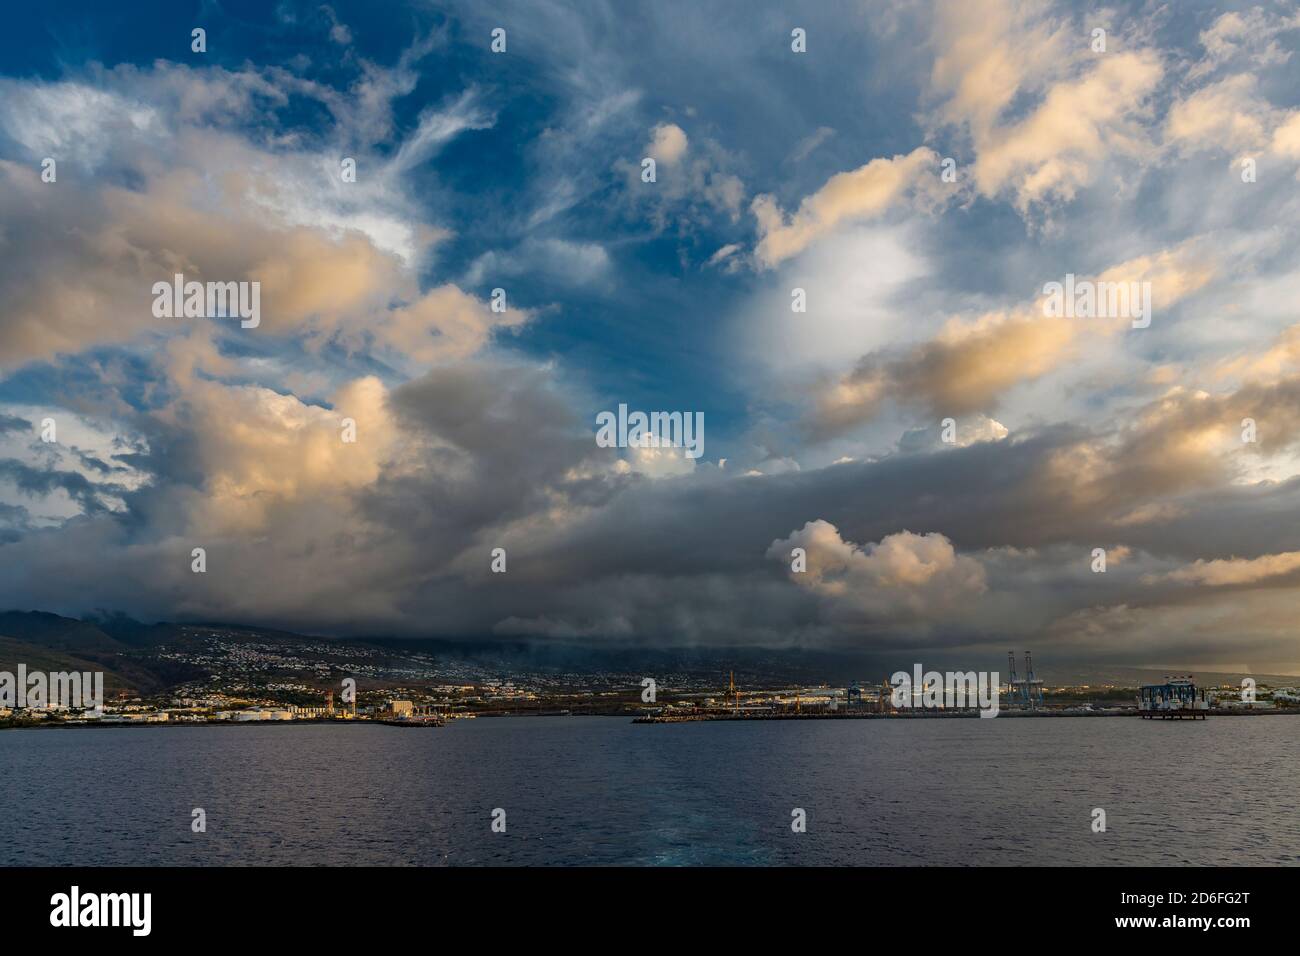 Storm clouds, view from the cruise ship to the island, La Réunion, French overseas territory, France, Africa, Indian Ocean Stock Photo